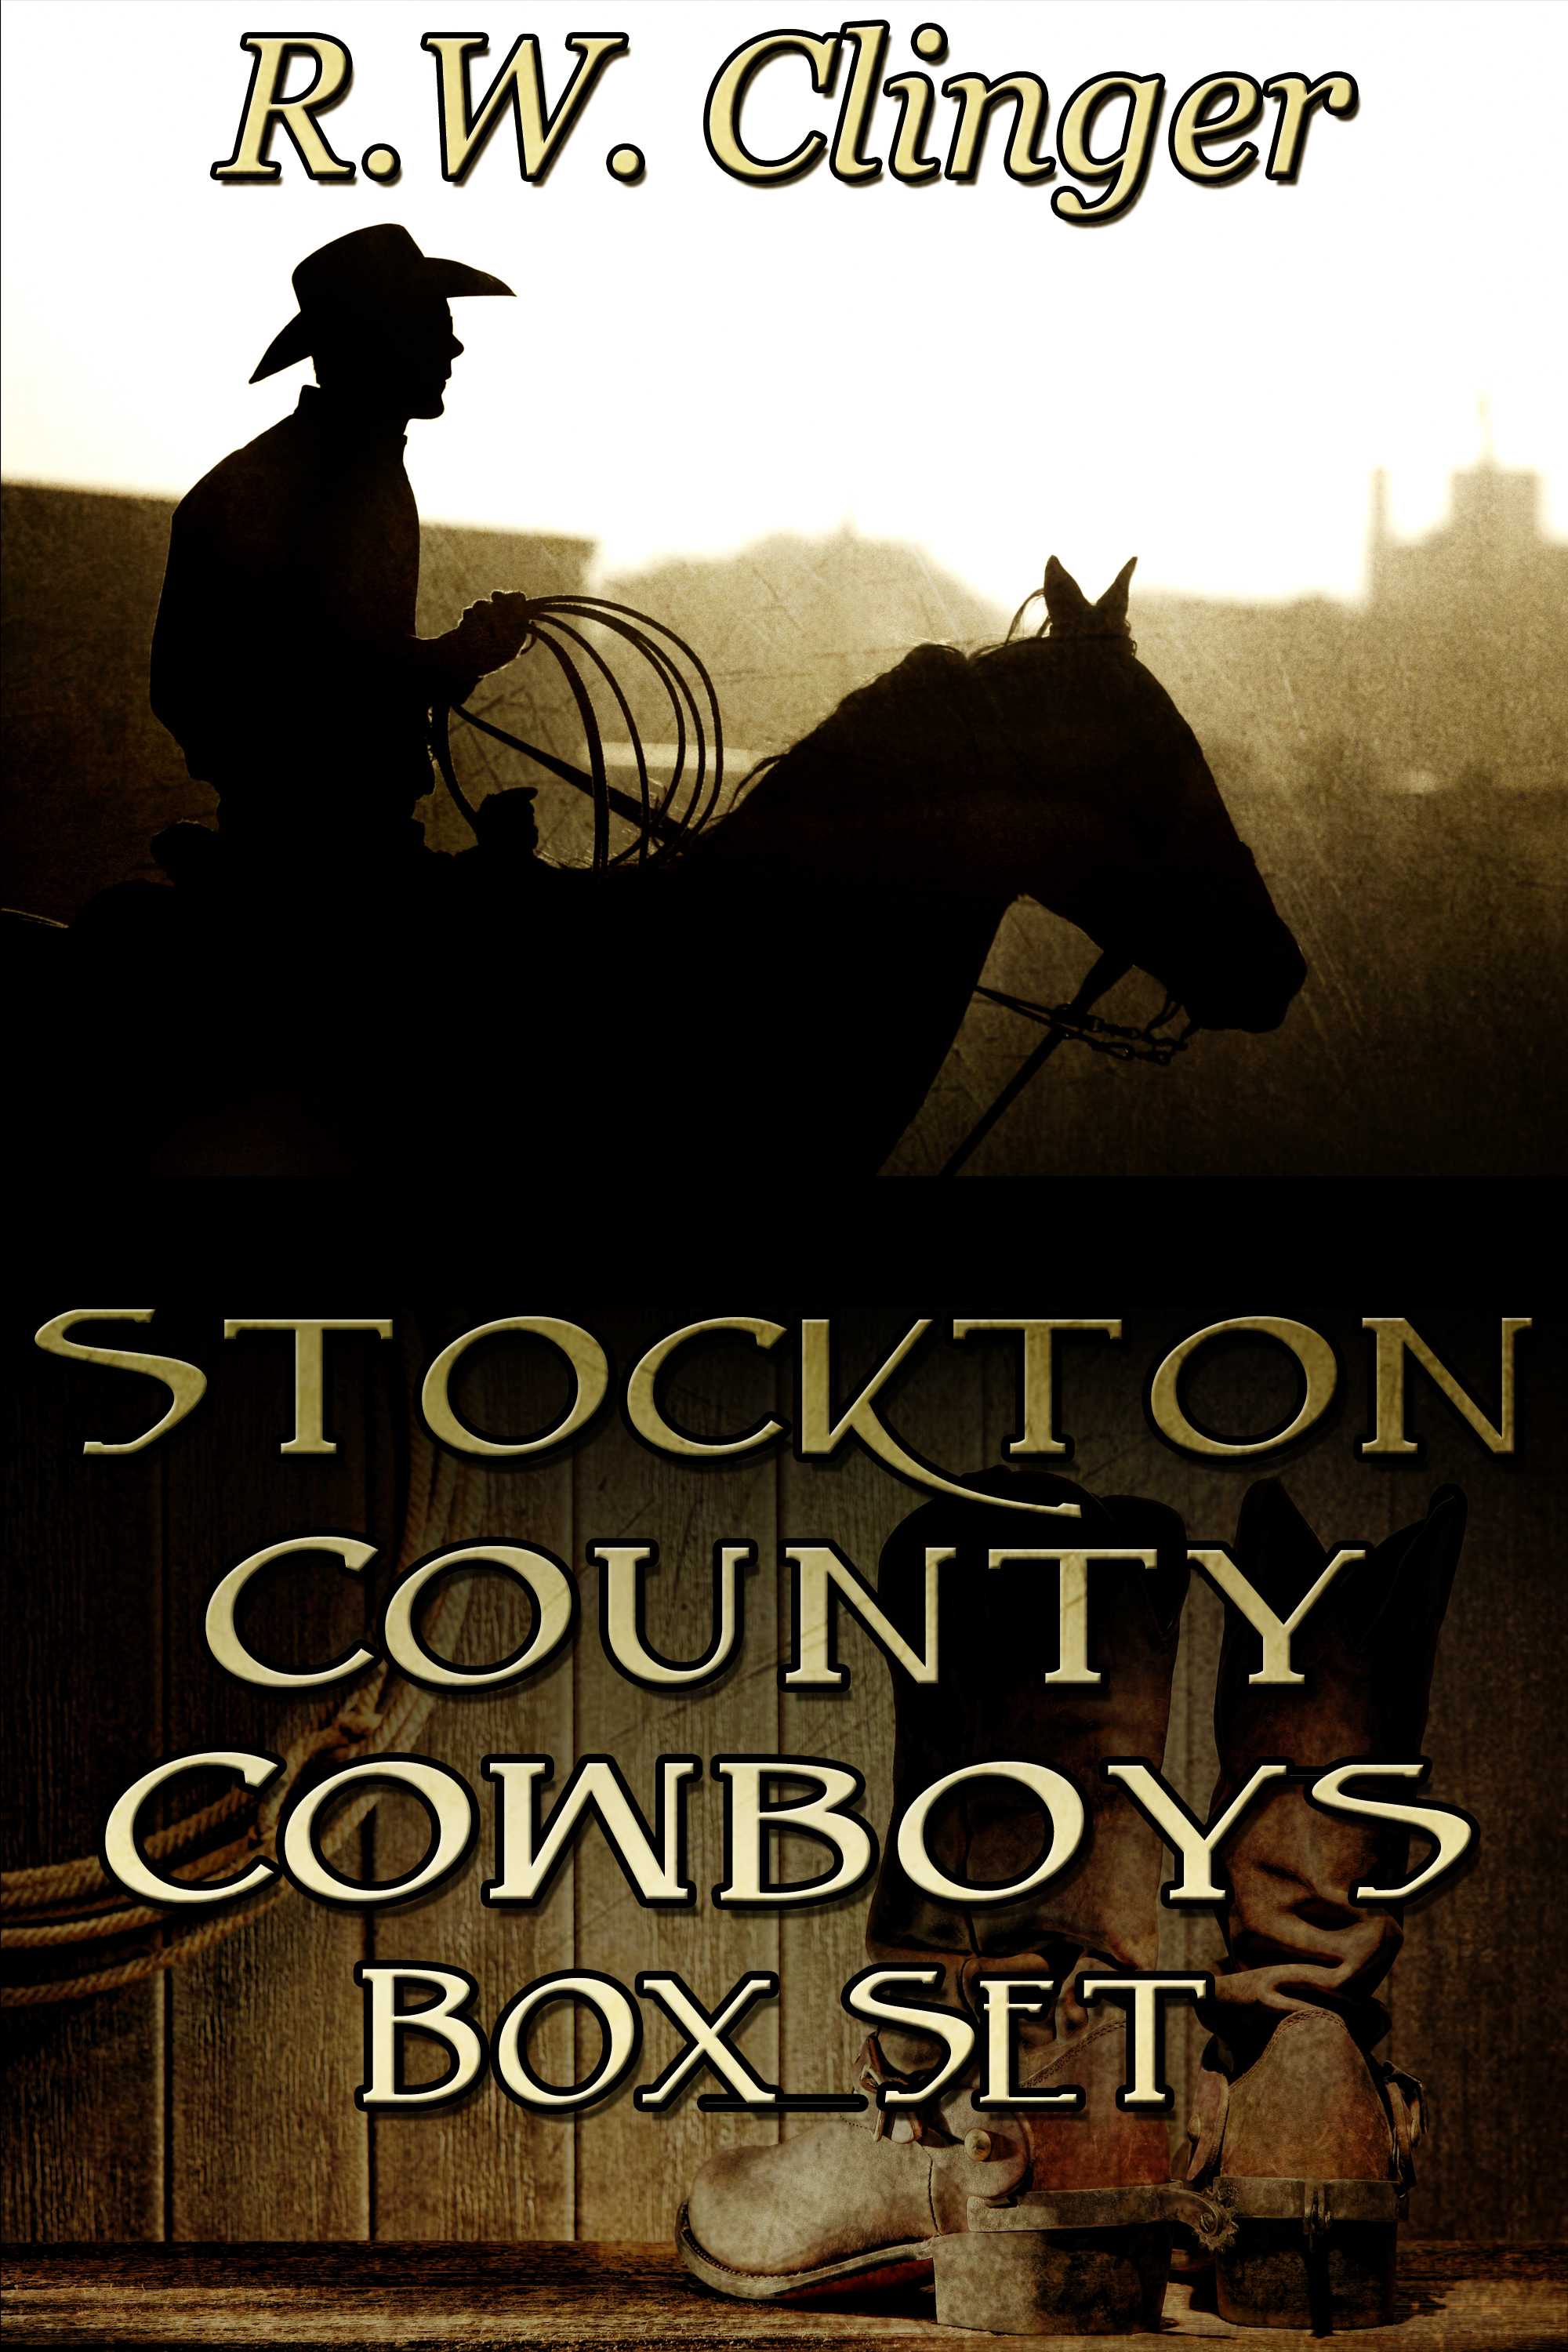 This image is the cover for the book Stockton County Cowboys Box Set, Stockton County Cowboys